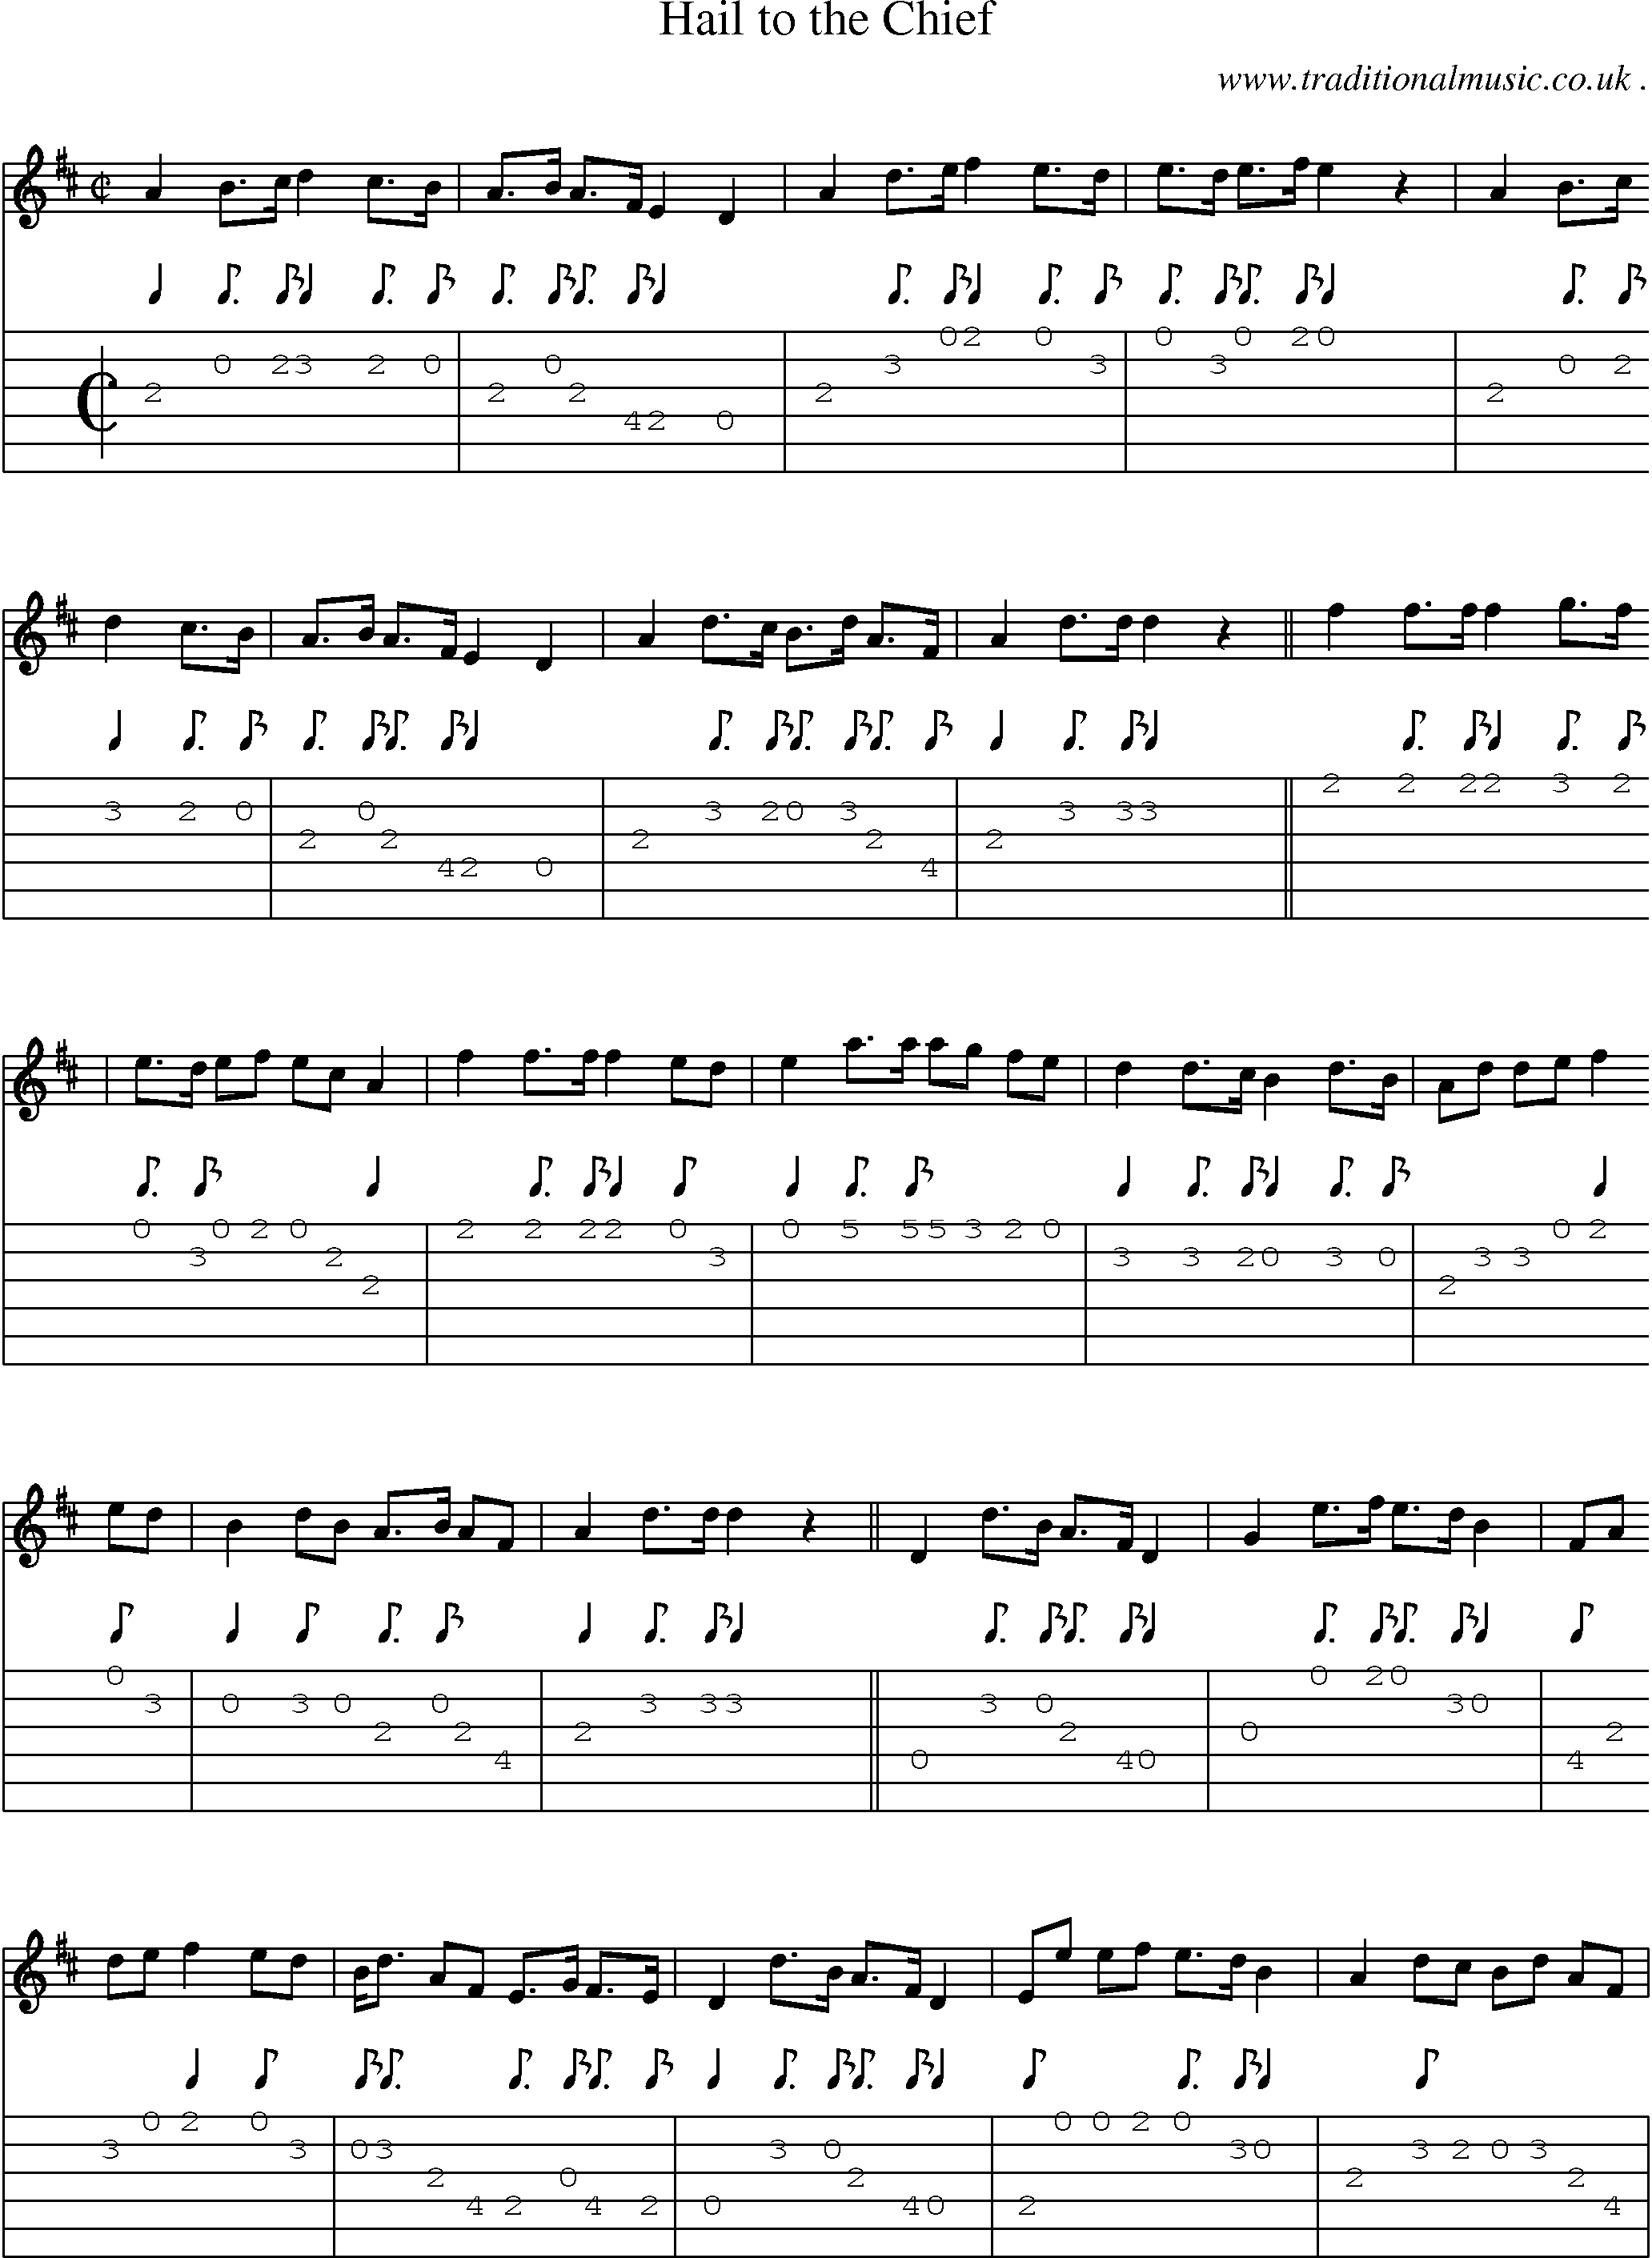 Music Score and Guitar Tabs for Hail To The Chief